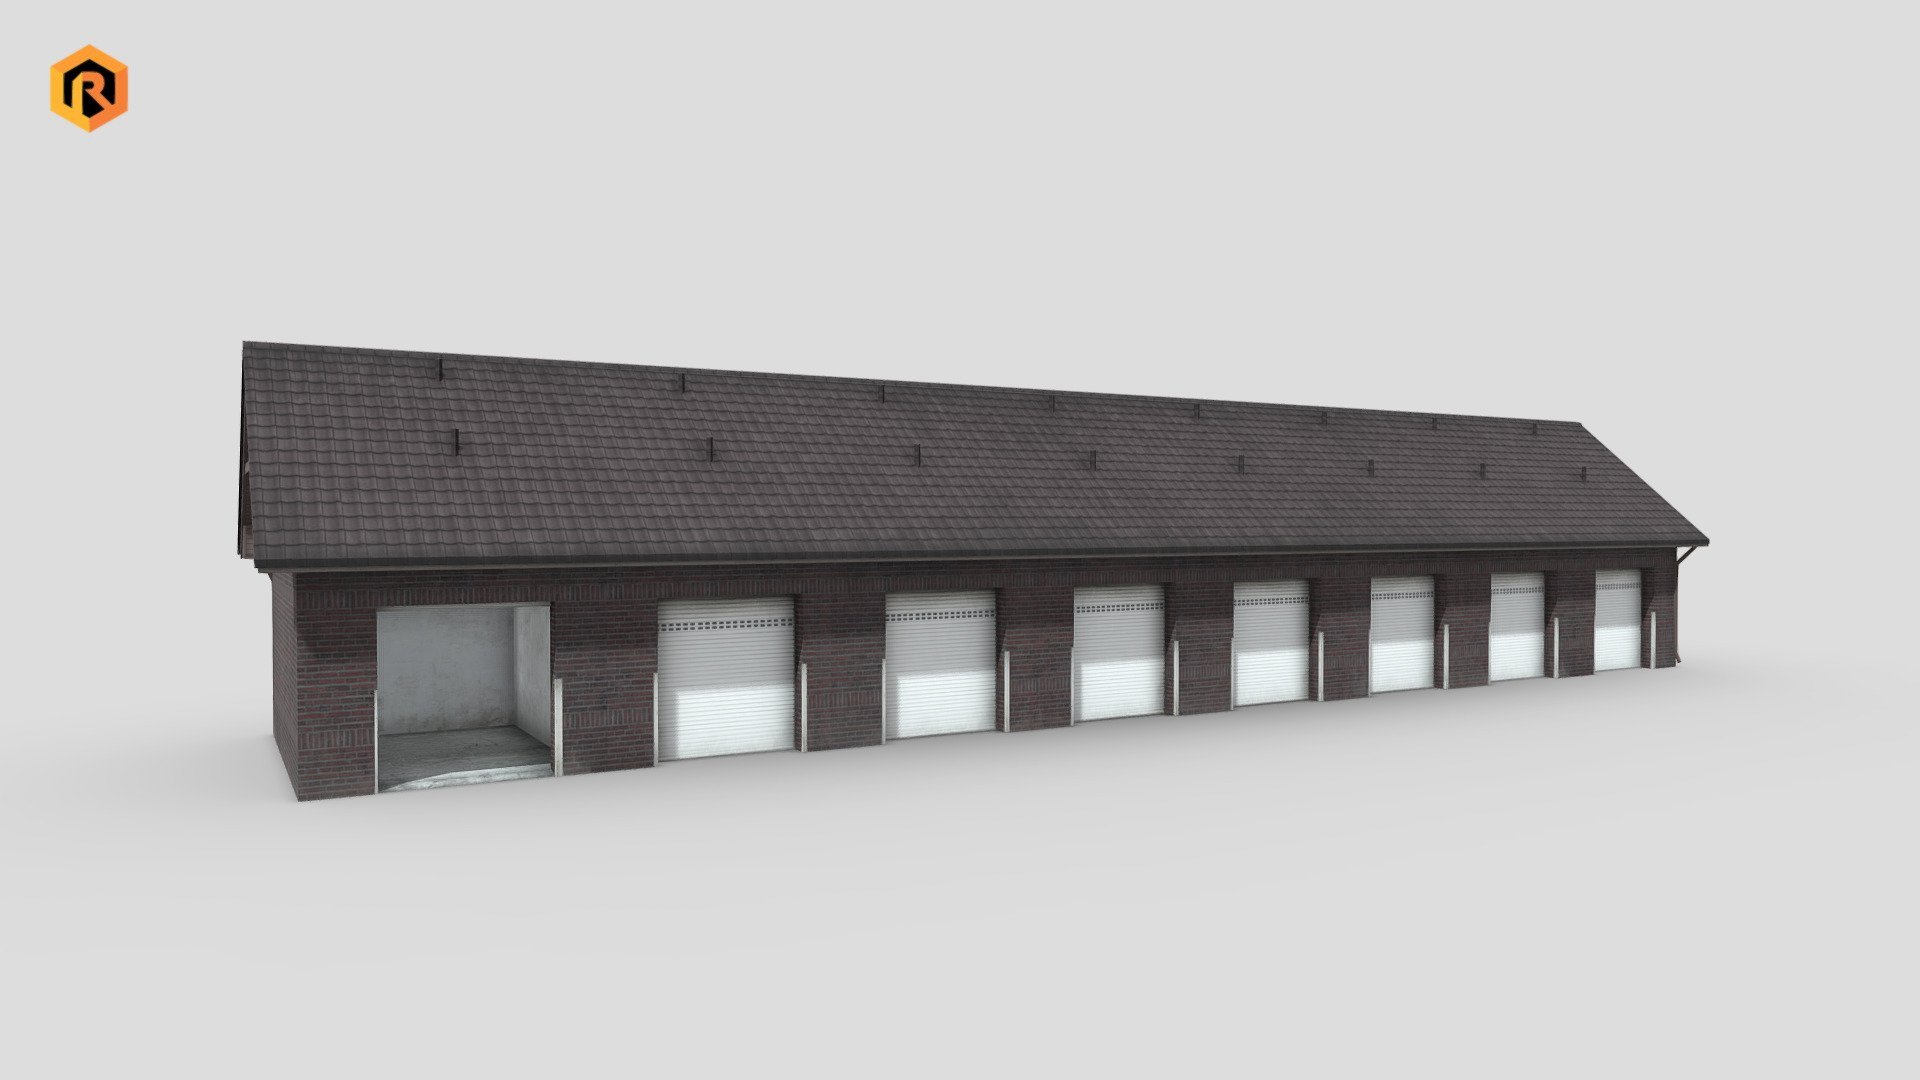 Low-poly 3D model of Big Garage Warehouse.

It is best for use in games and other VR / AR, real-time applications such as Unity or Unreal Engine. 

It can also be rendered in Blender (ex Cycles) or Vray as the model is equipped with proper textures.   

You can also buy this model in a bundle: https://skfb.ly/ovQJB

Technical details:  




2048 Diffuse and AO texture set 

829 Triangles  

629 Vertices 

Model is one mesh   

Model completely unwrapped   

All nodes, materials and textures are appropriately named   

Lot of additional file formats included (Blender, Unity, Maya etc.)   

More file formats are available in additional zip file on product page.

Please feel free to contact me if you have any questions or need any support for this asset.

Support e-mail: support@rescue3d.com - Big Garage Warehouse - Buy Royalty Free 3D model by Rescue3D Assets (@rescue3d) 3d model